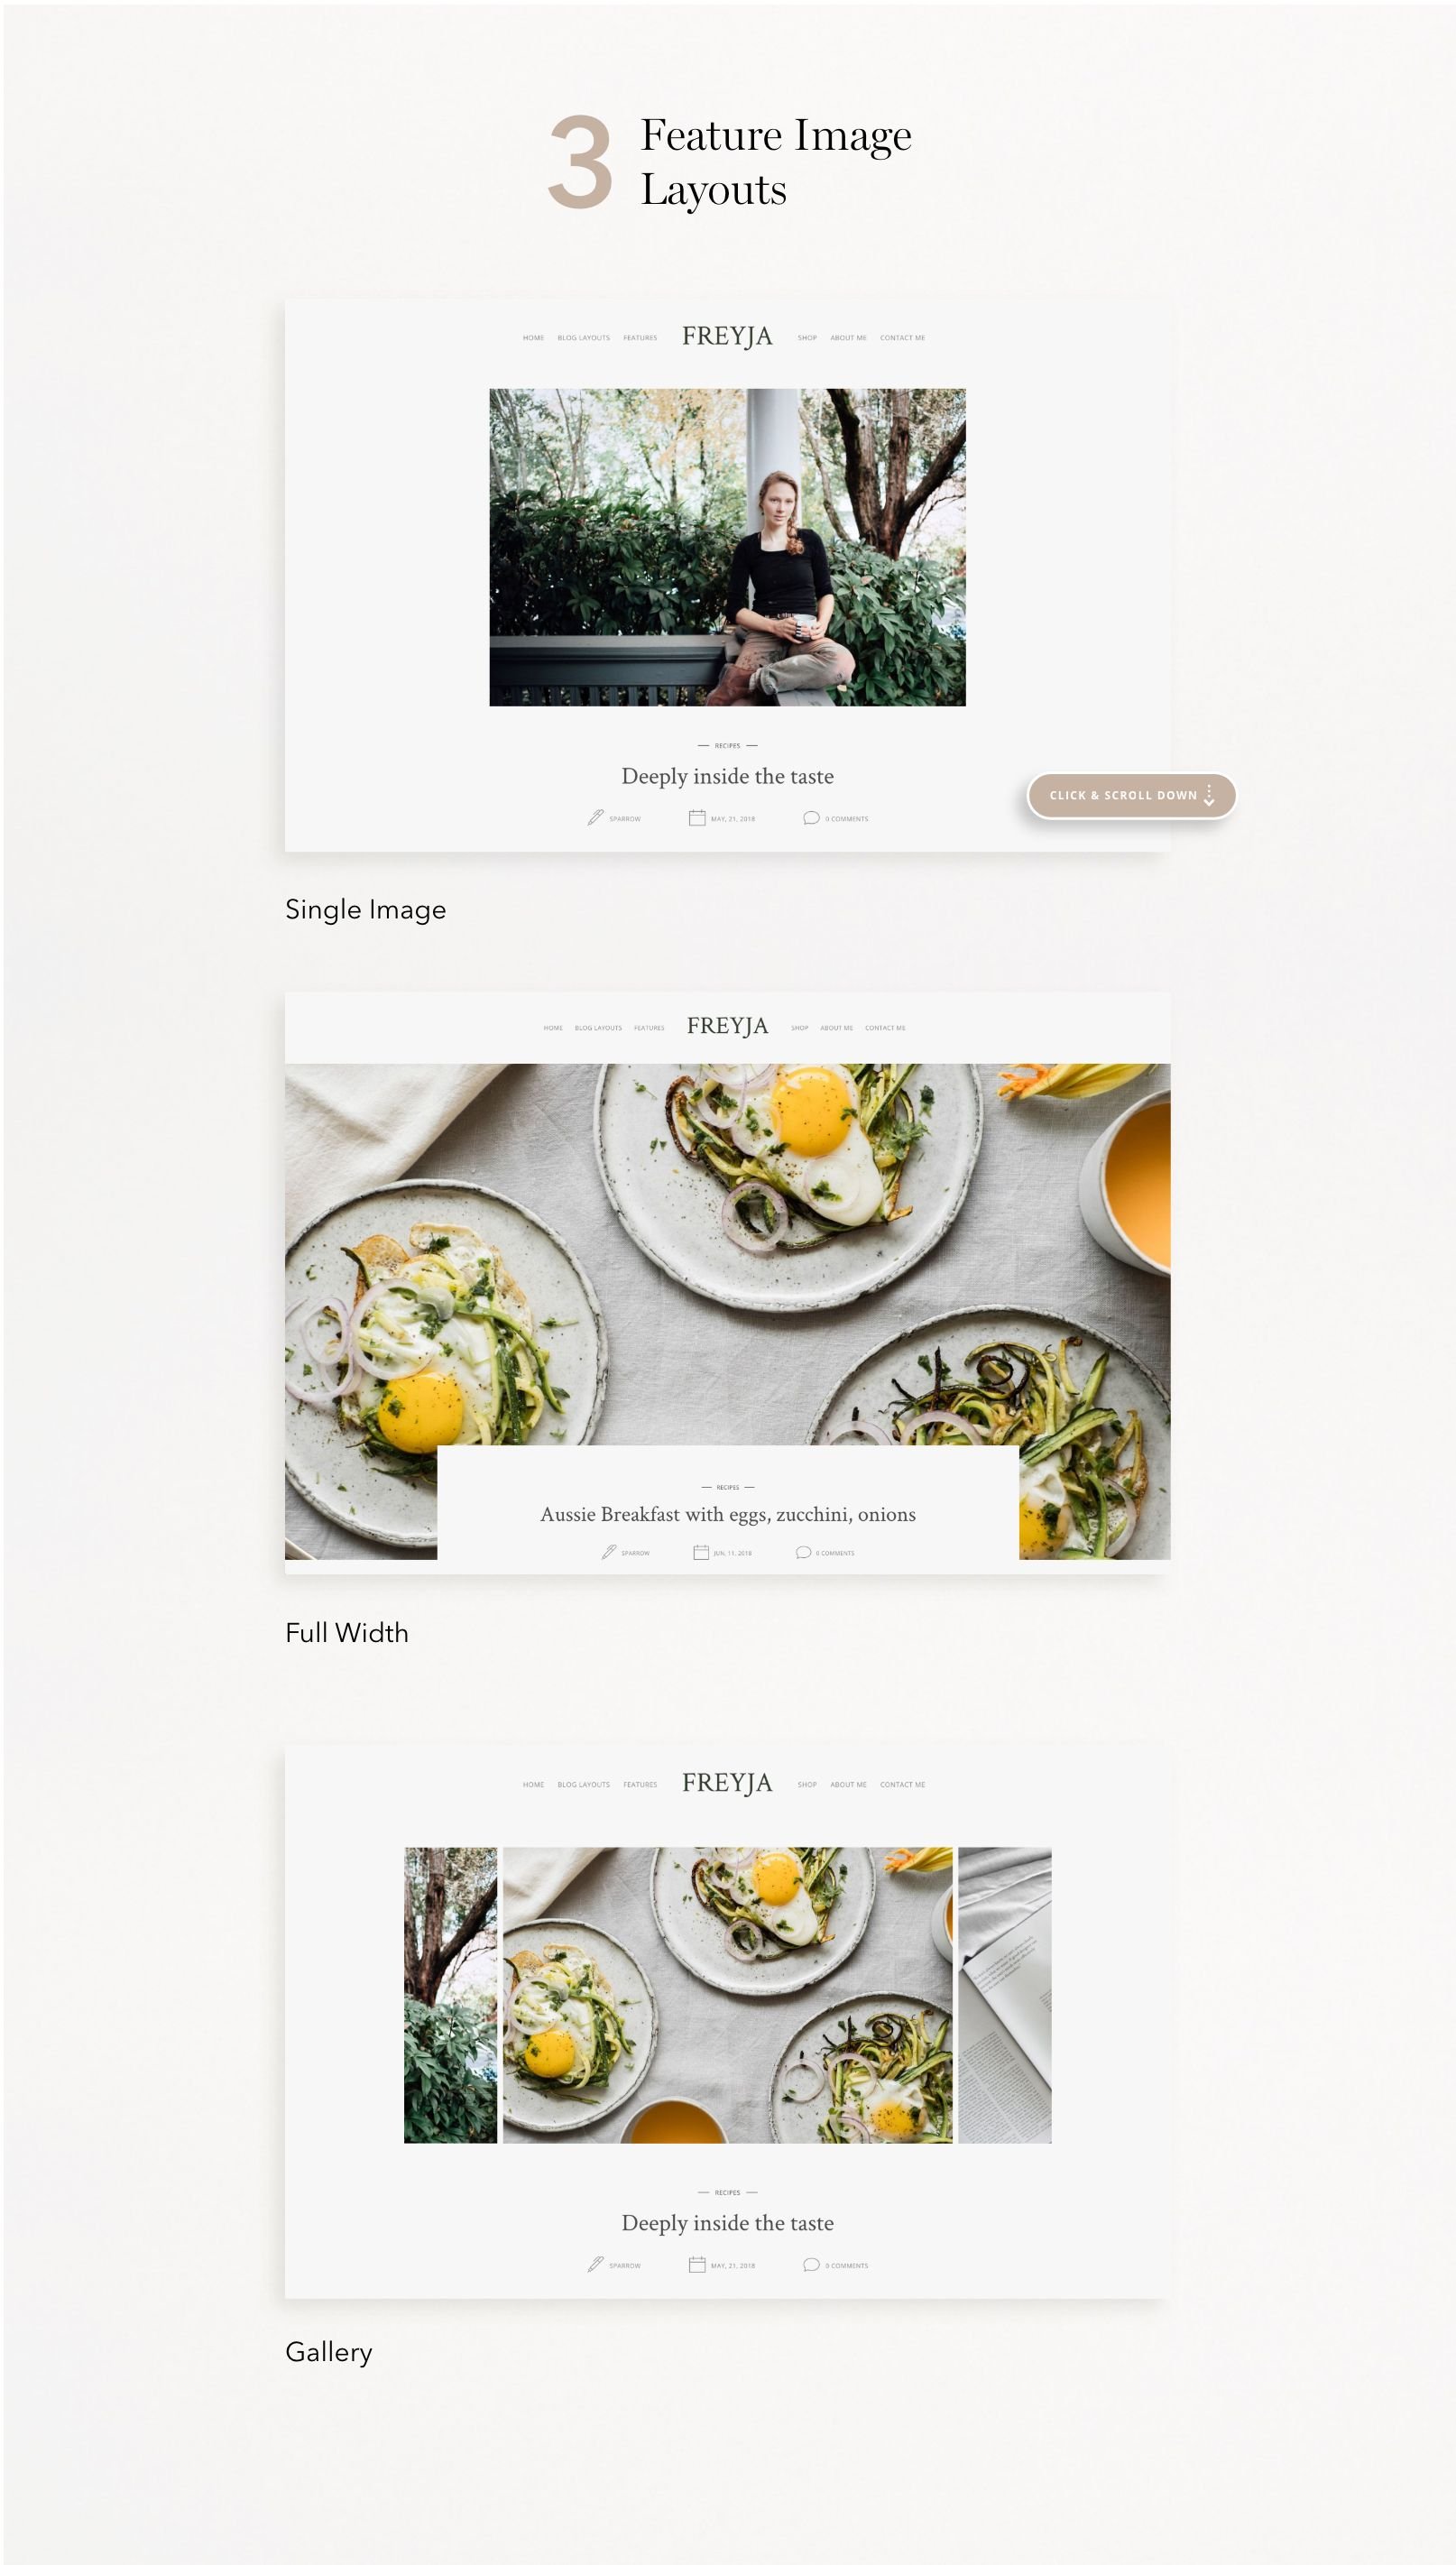 Features image layouts.